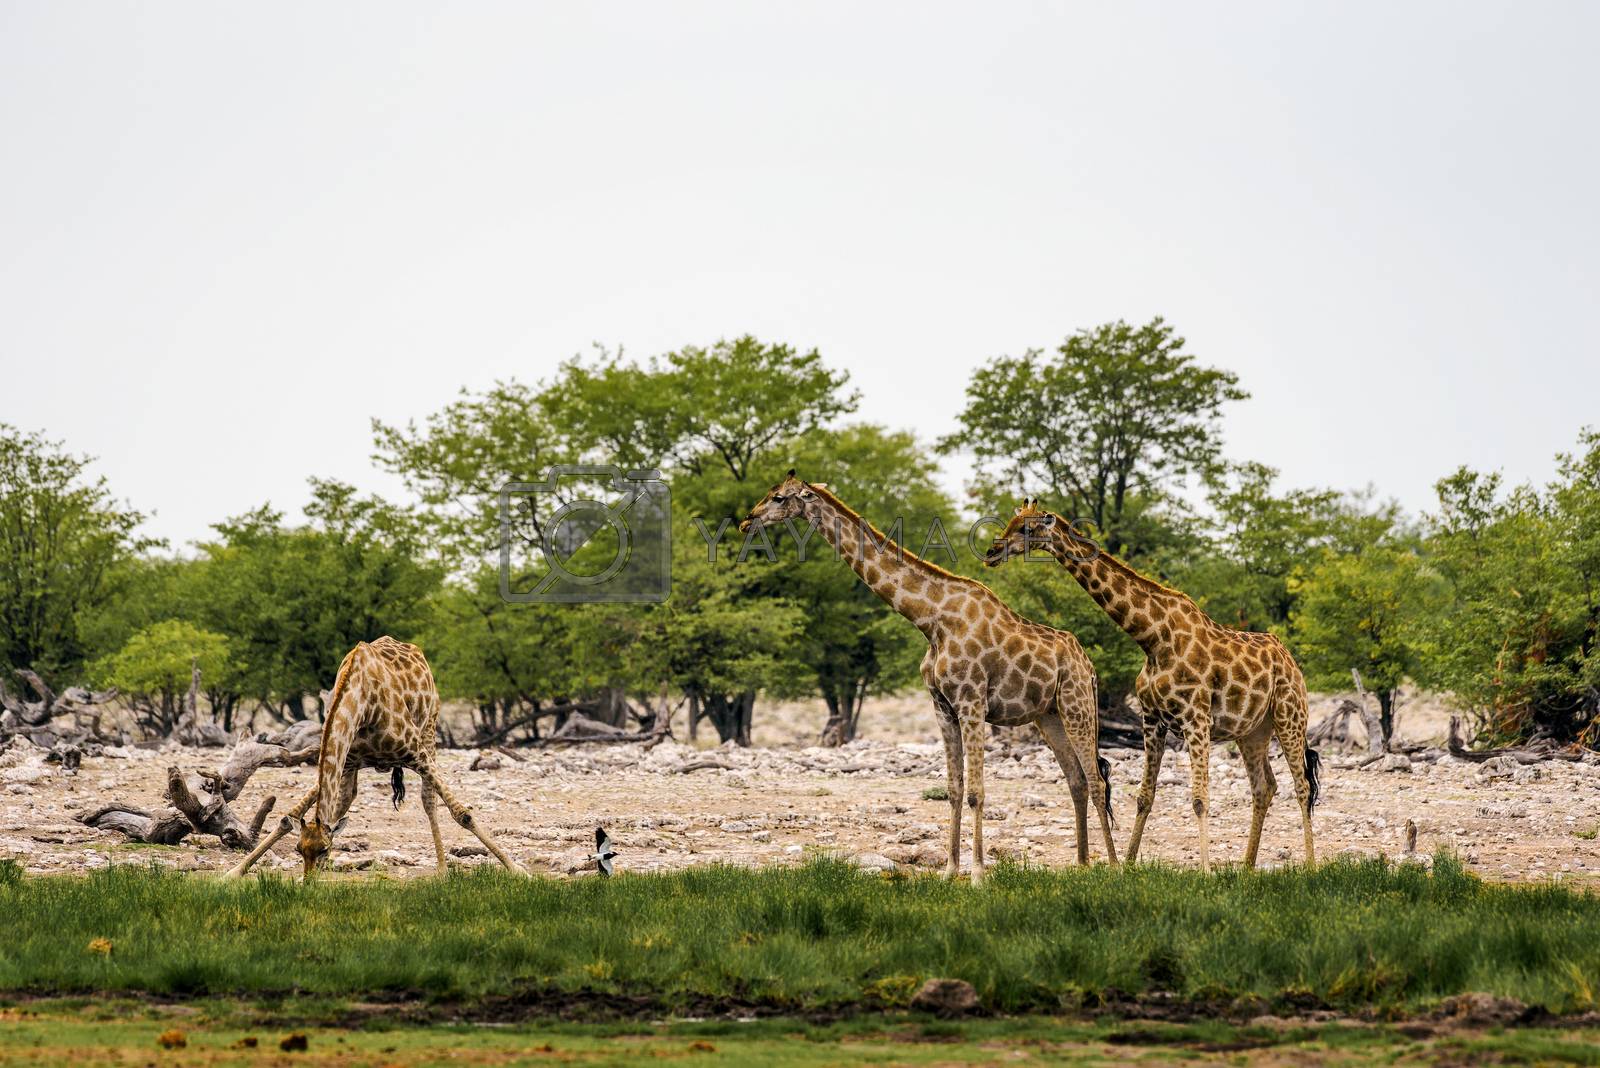 Royalty free image of Giraffes drink water from a waterhole in Etosha National Park by nickfox